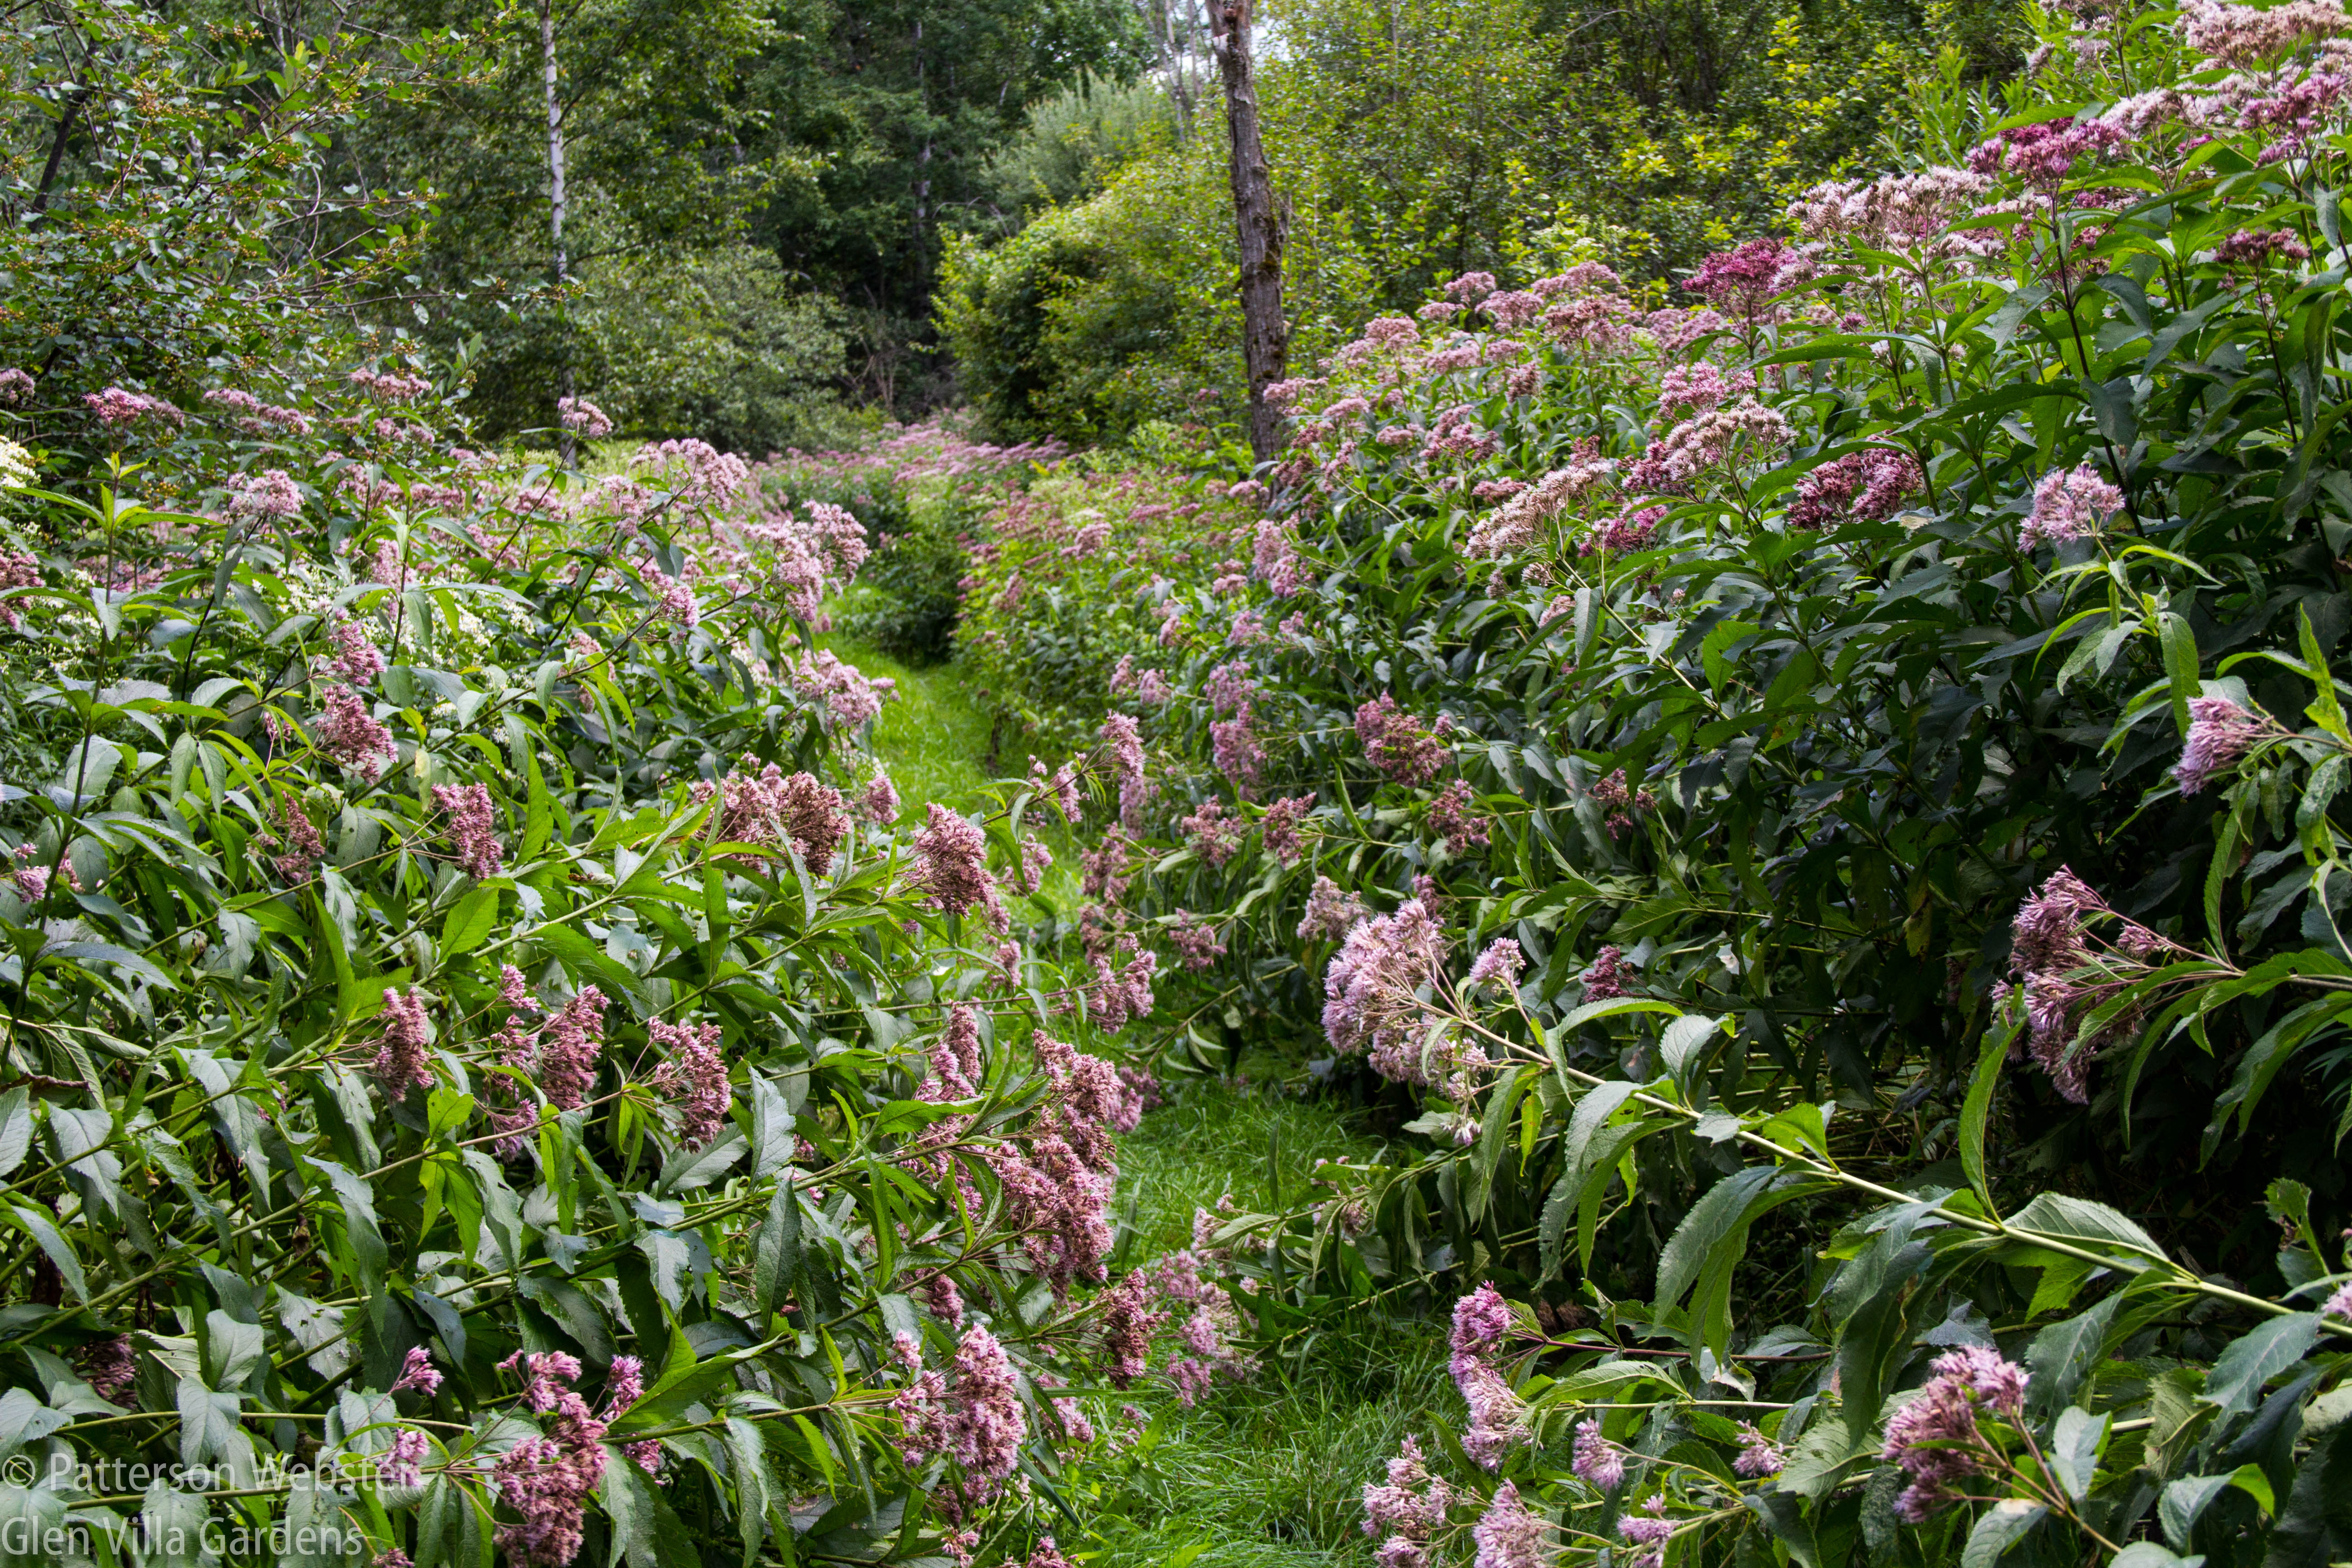 The trail through the Joe Pye weed is luscious in August. 